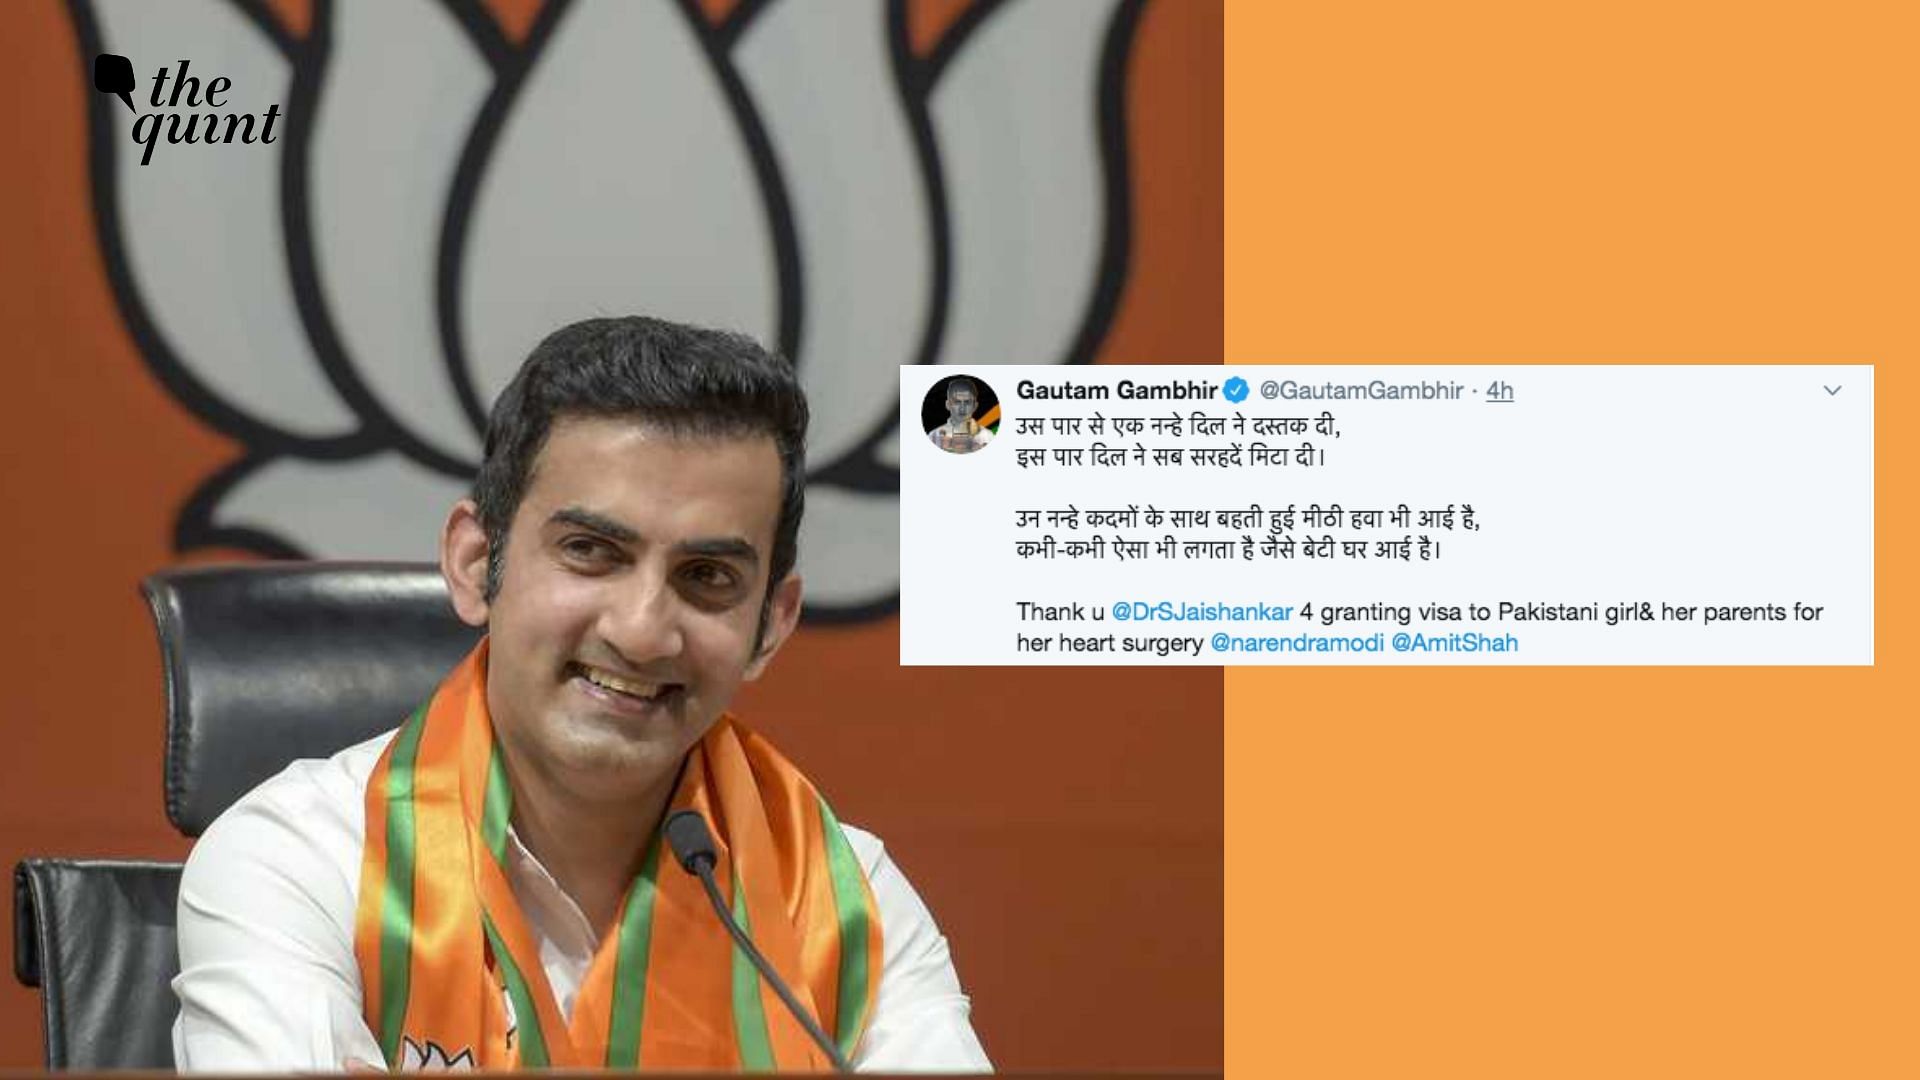 A 7-year-old Pakistani national, Omaima Ali, with a congenital heart disorder has been issued a visa to undergo treatment in India after BJP MP Gautam Gambhir wrote to the Ministry of External Affairs.